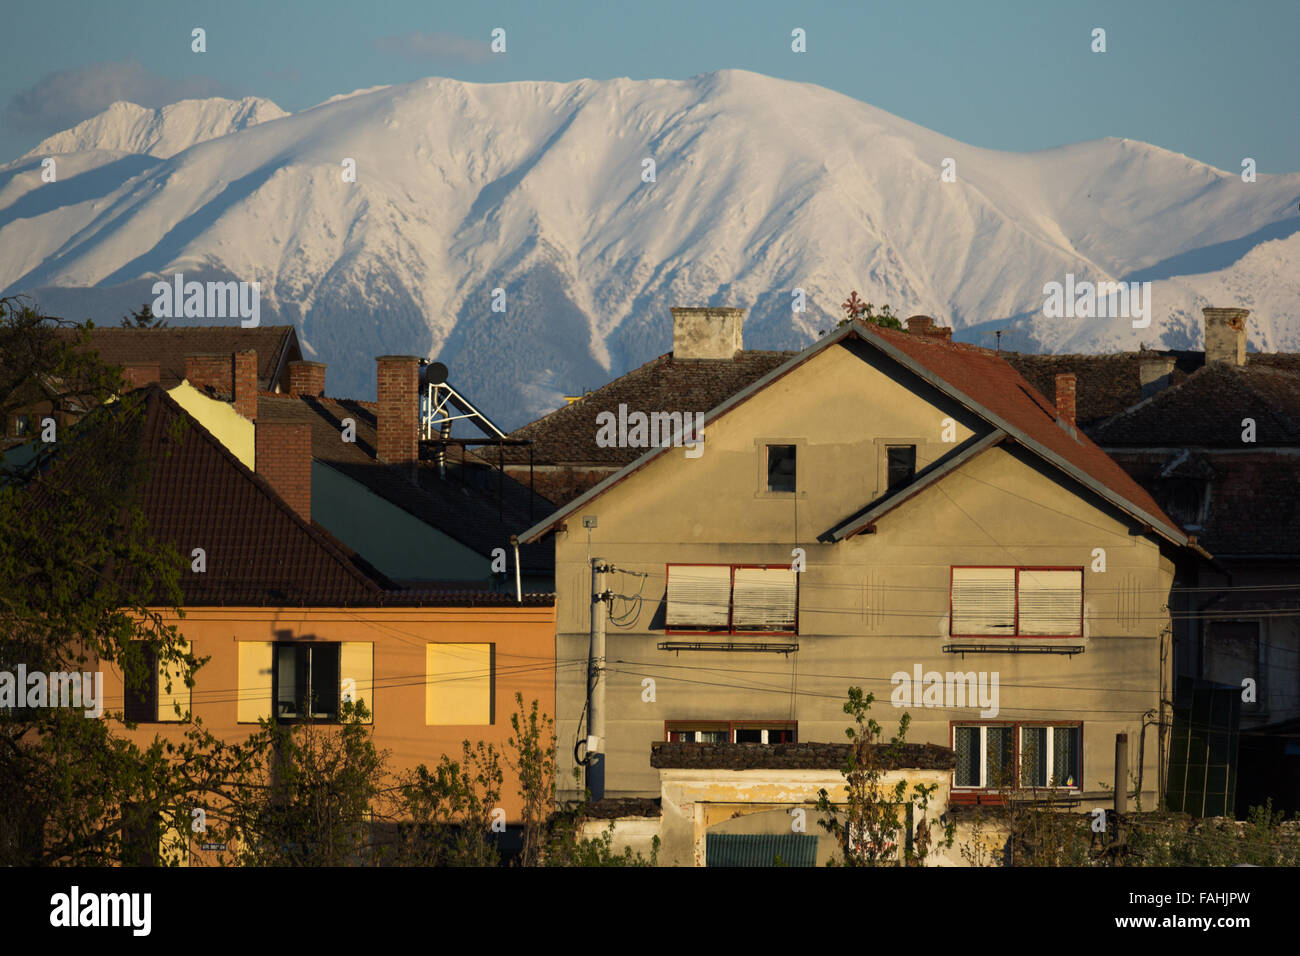 Winter mountain houses in a romanian city with snowy mountains in the background Stock Photo